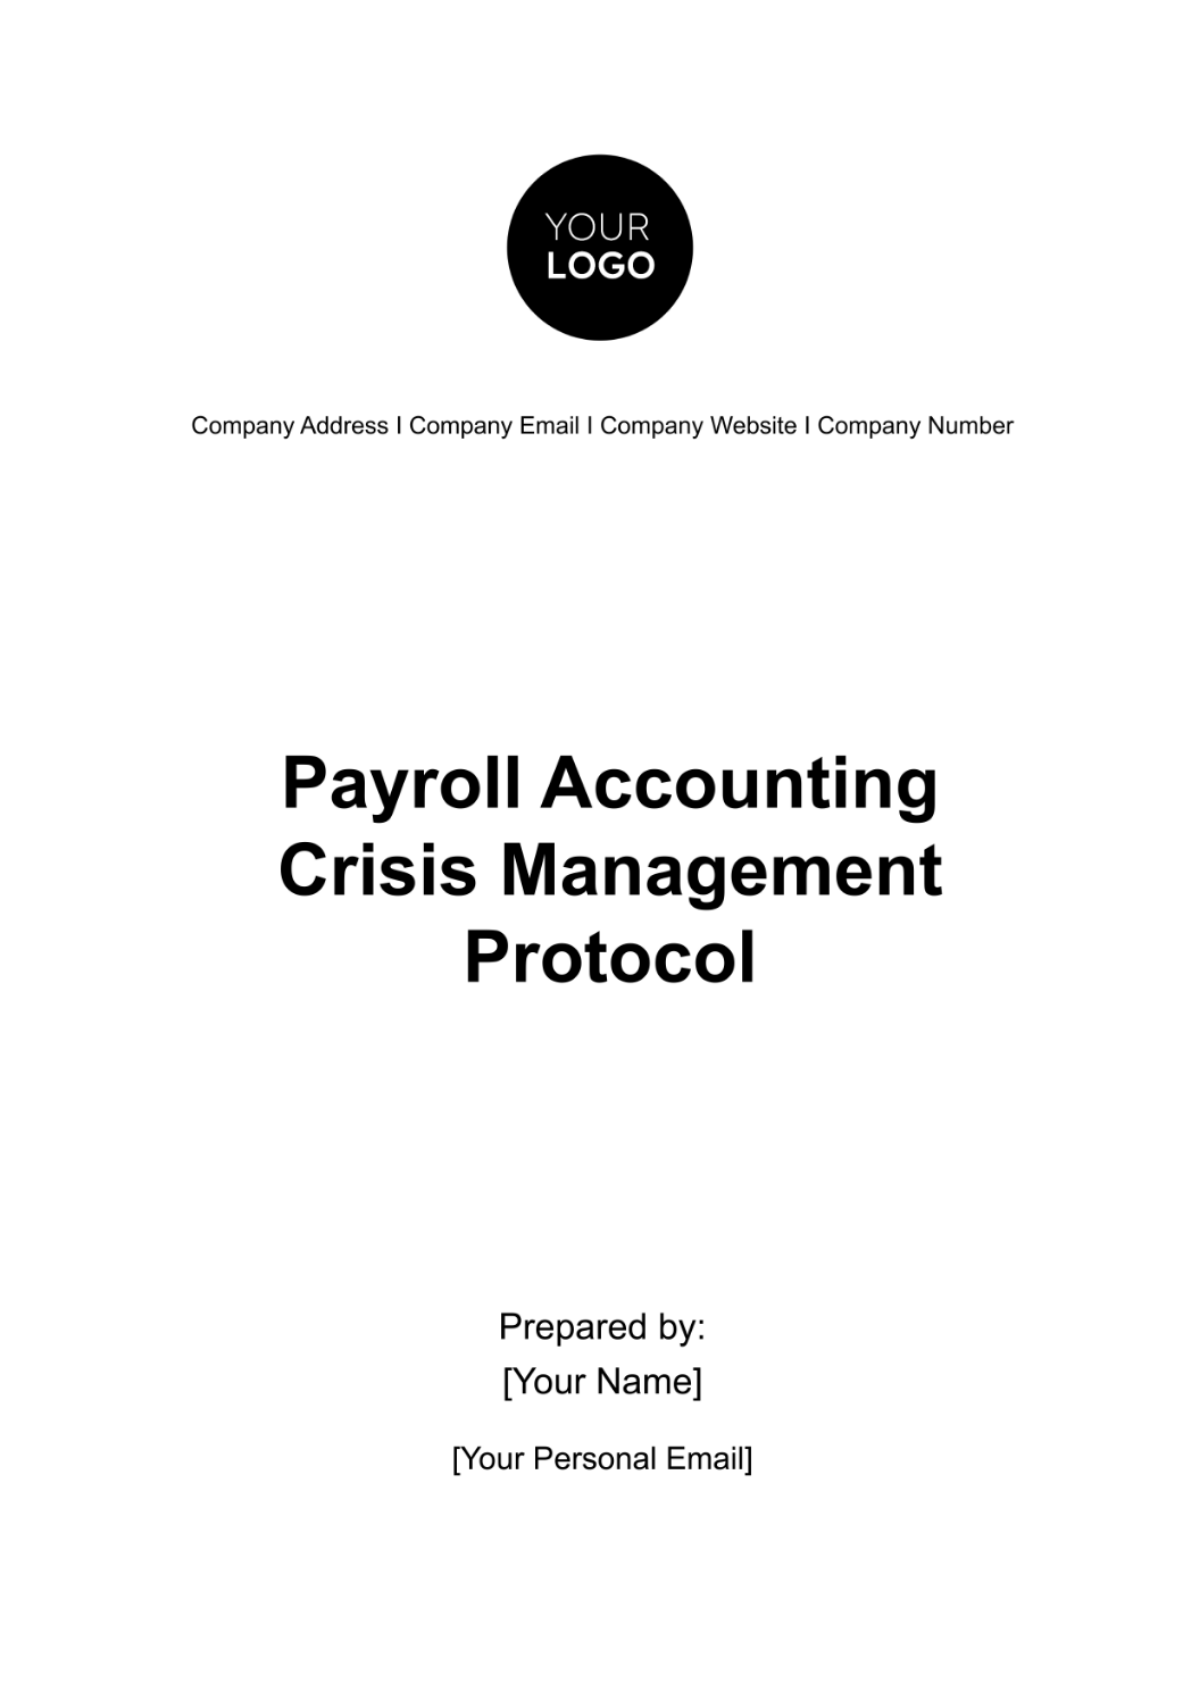 Payroll Accounting Crisis Management Protocol Template